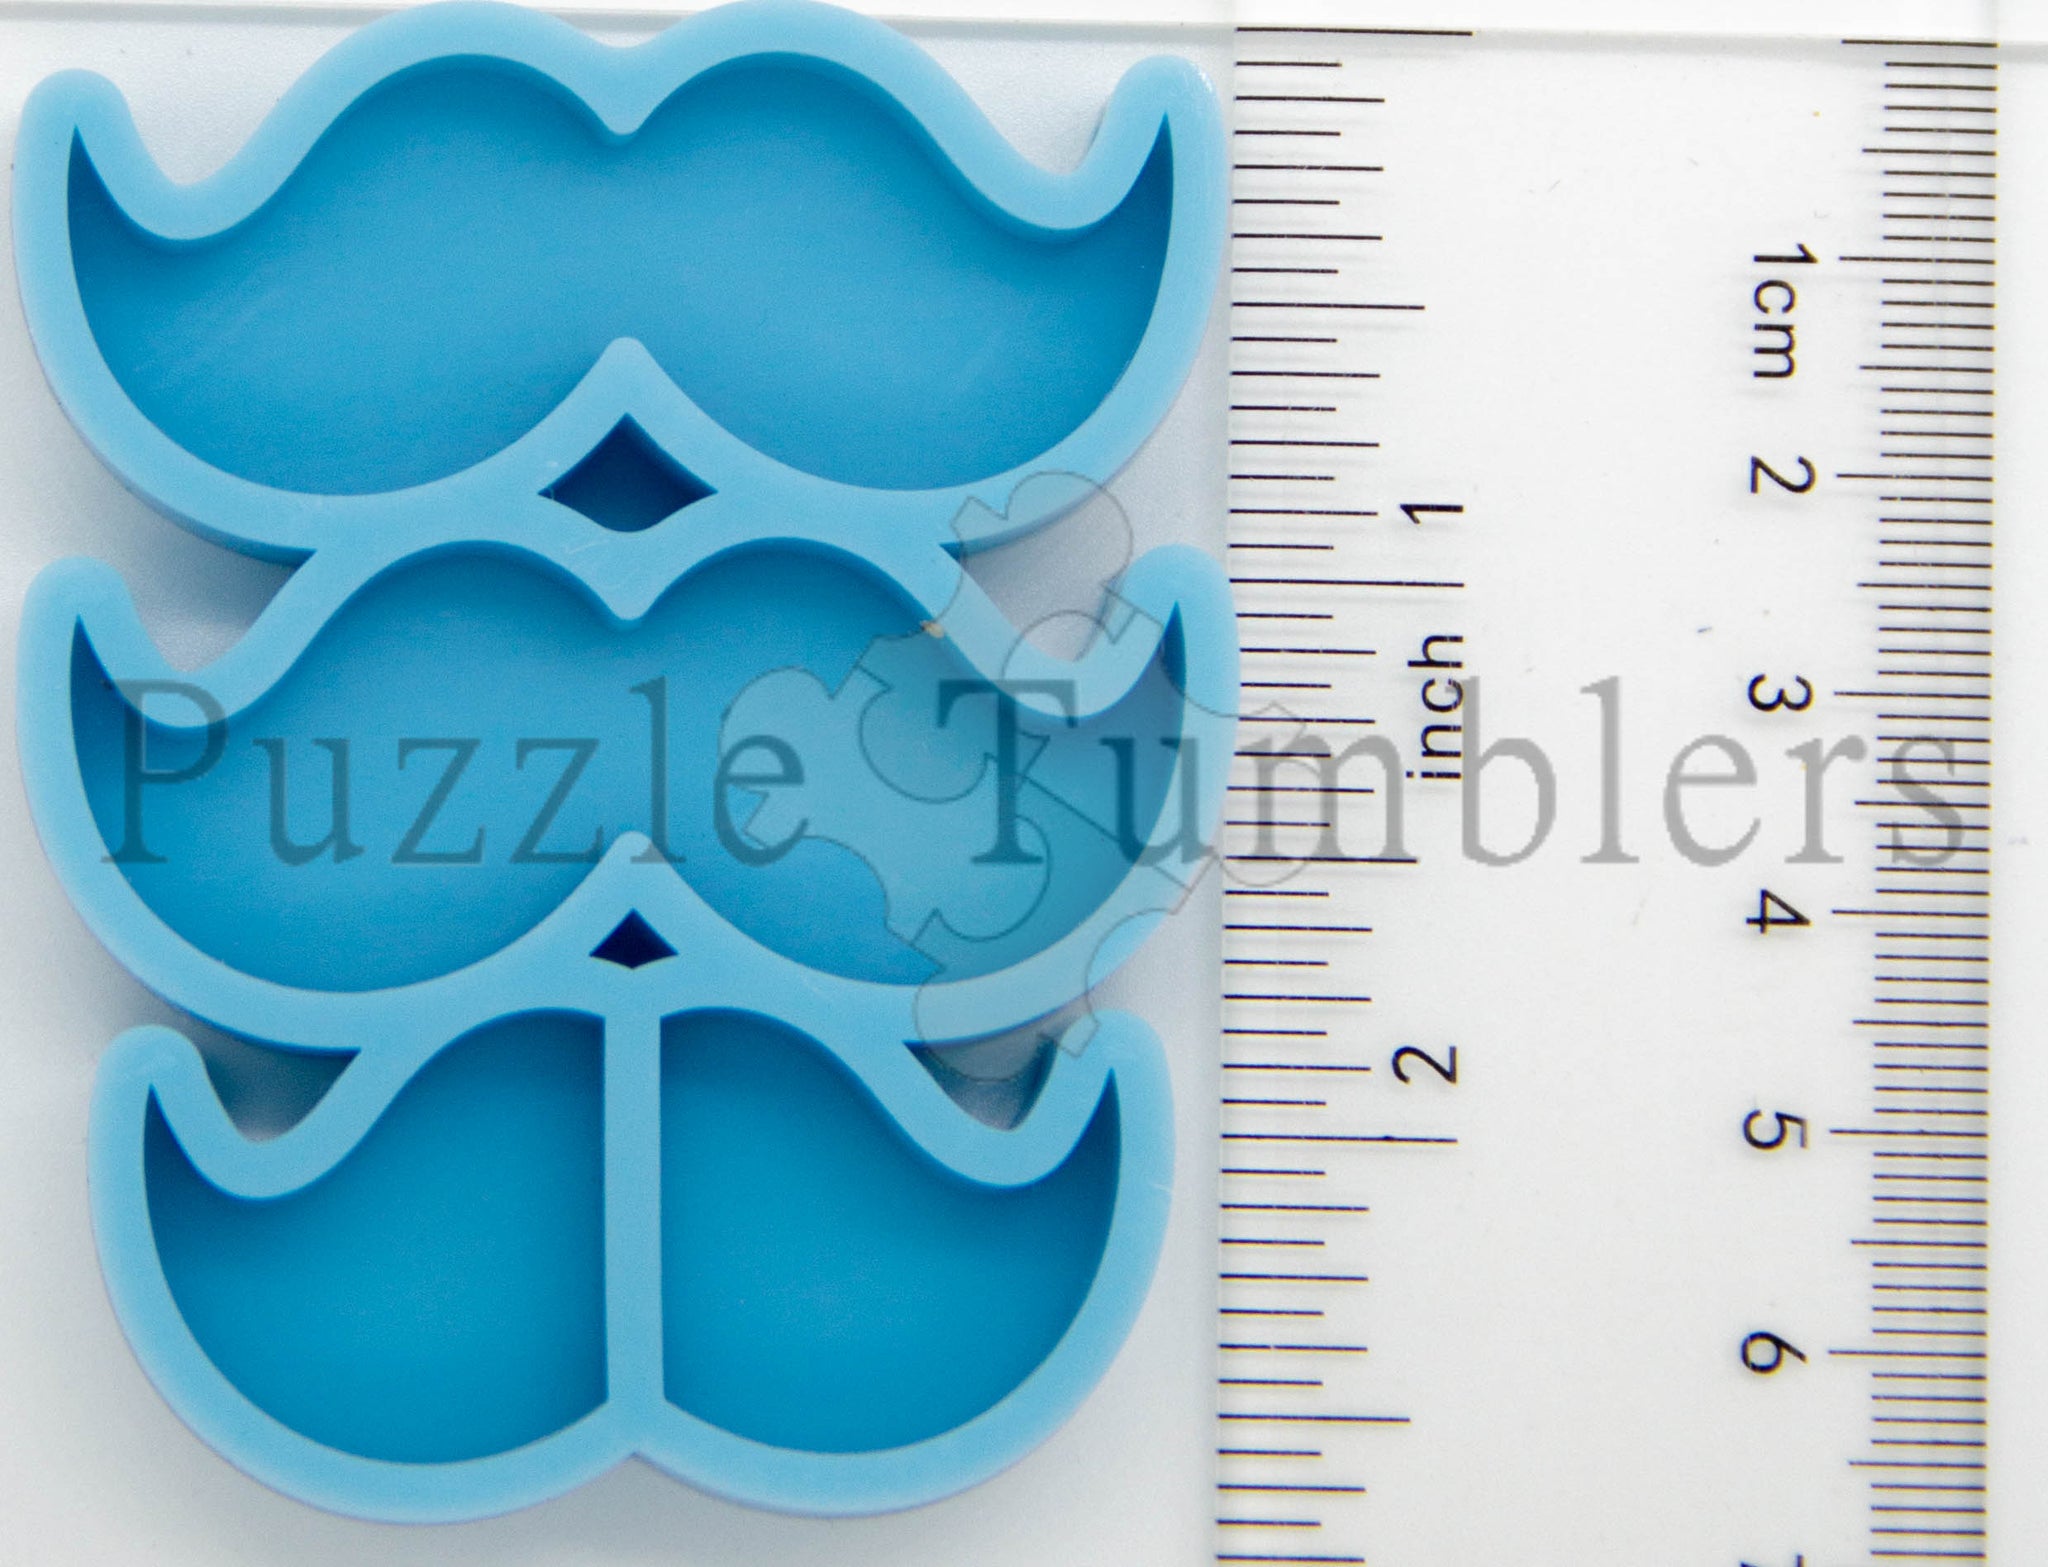 NEW - CACTUS STRAW TOPPER - NEW MOLD – Puzzle Tumblers